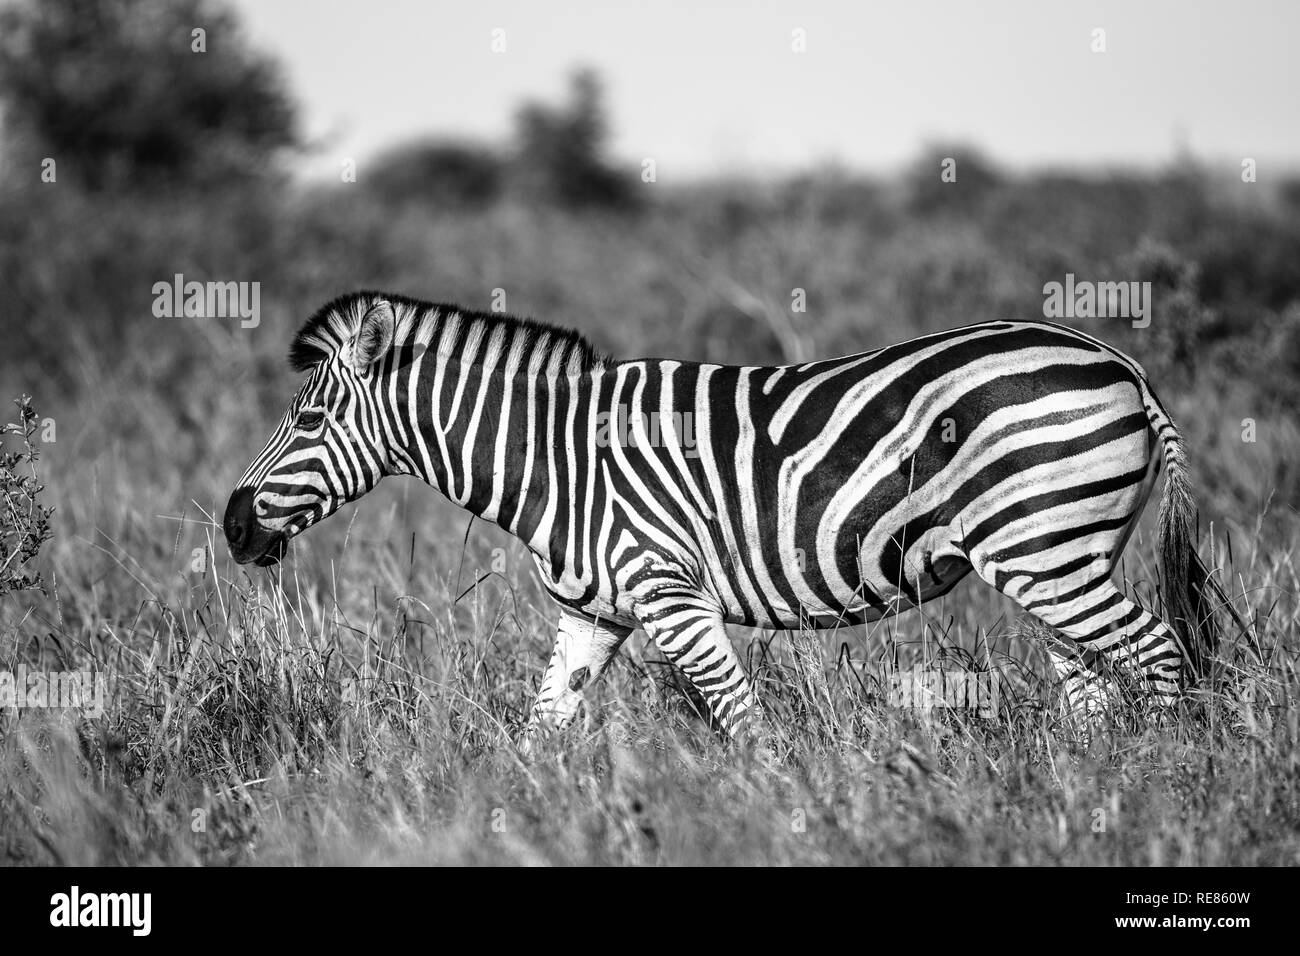 Common Zebra (Equus quagga) in black and white in Kruger national park South Africa Stock Photo